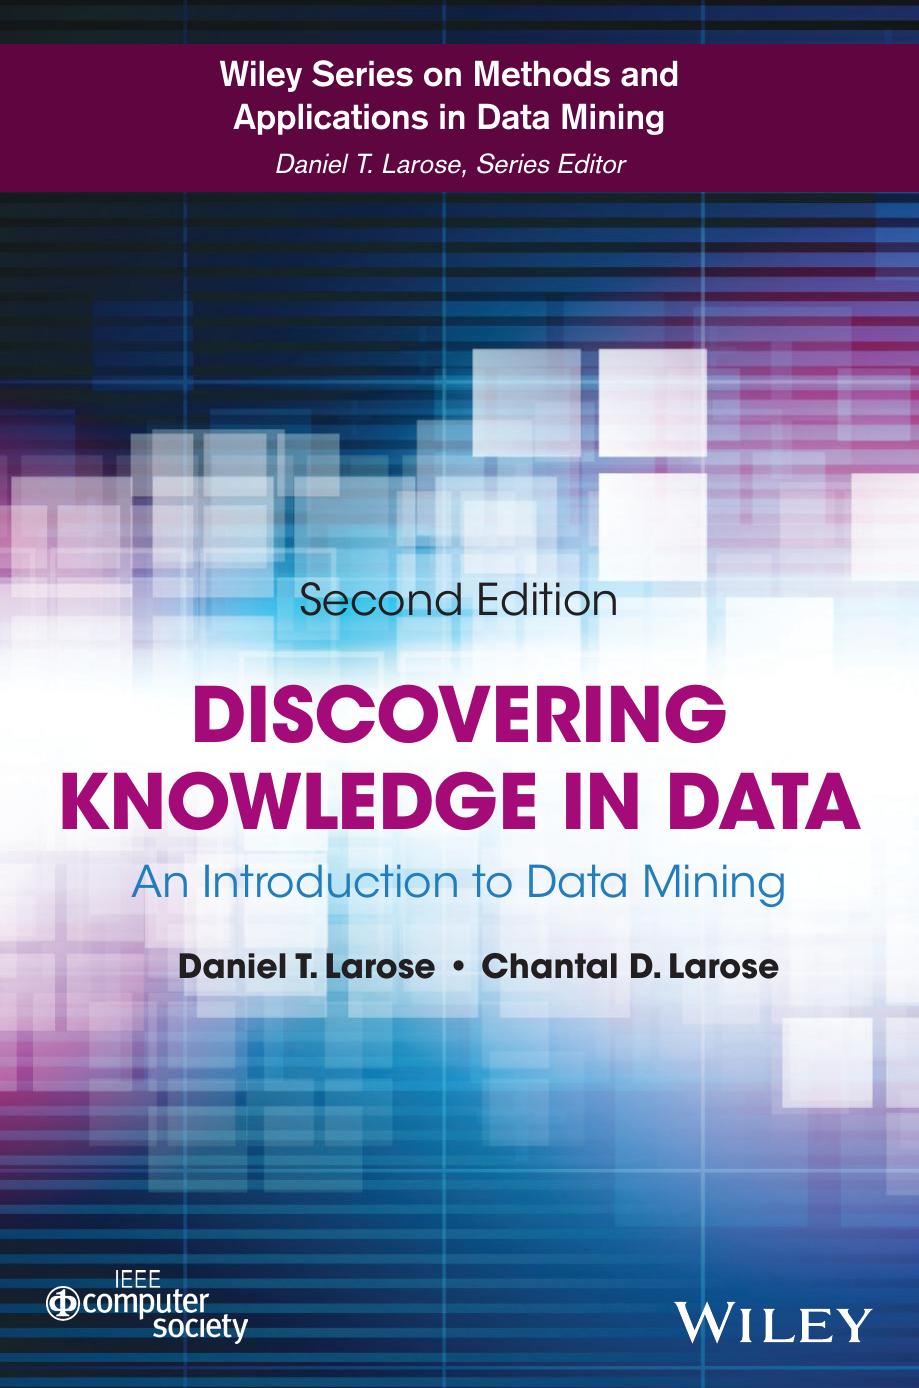 Discovering Knowledge in data An Introduction to Data Mining by Daniel T. Larose, Chantel D. Larose (z-lib.org)-1-1